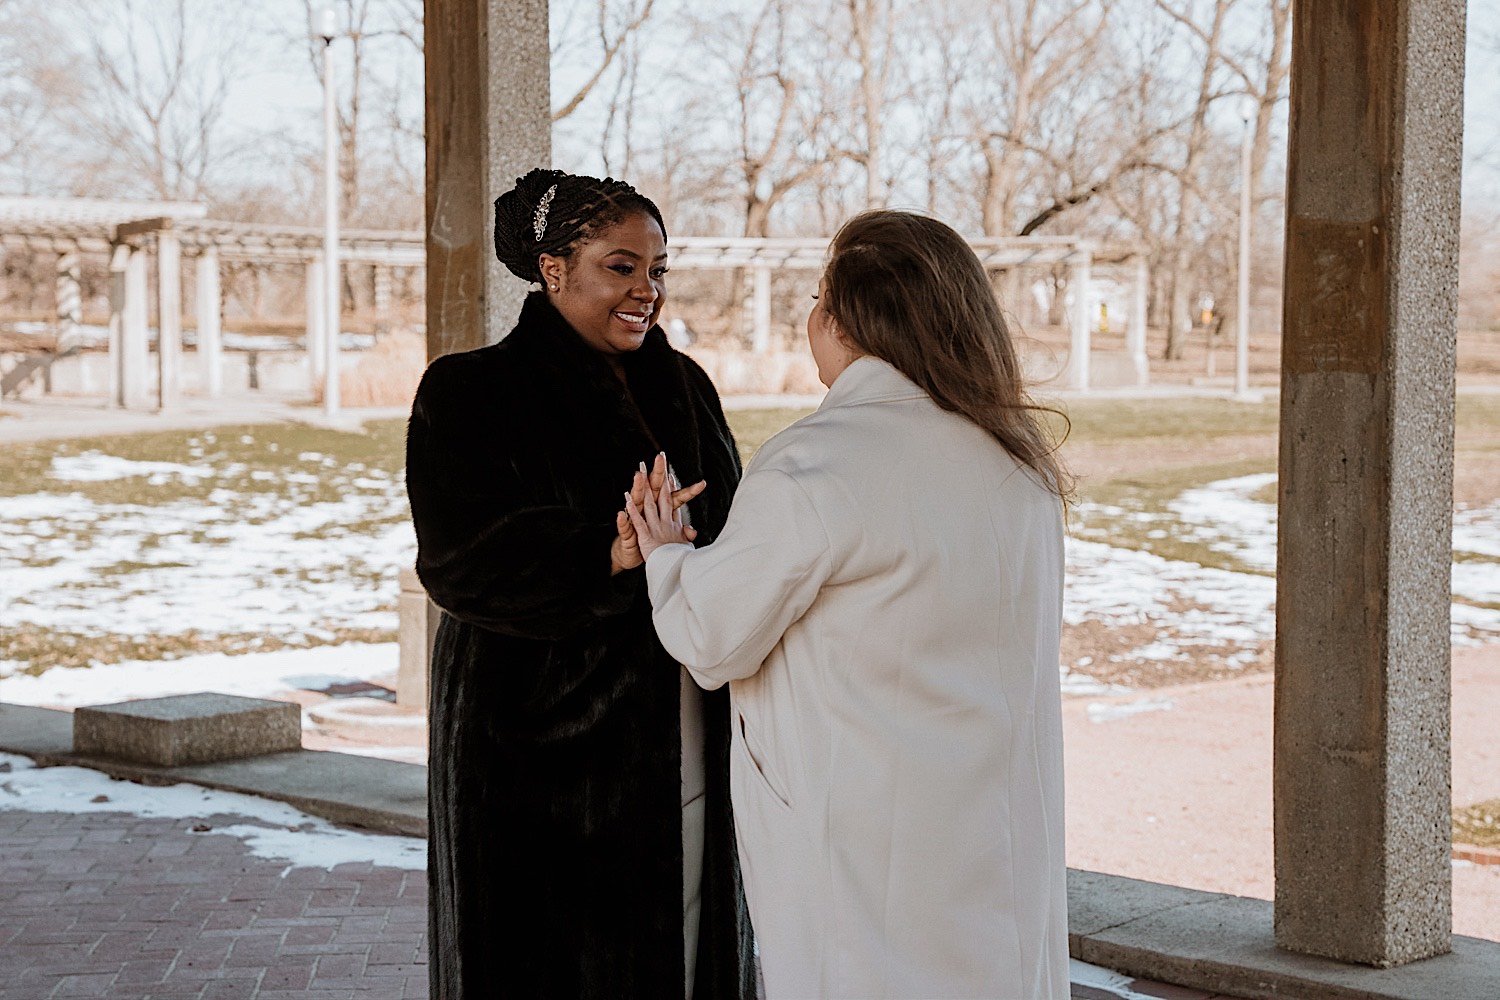 Brides hold hands during their first look in Humboldt Park